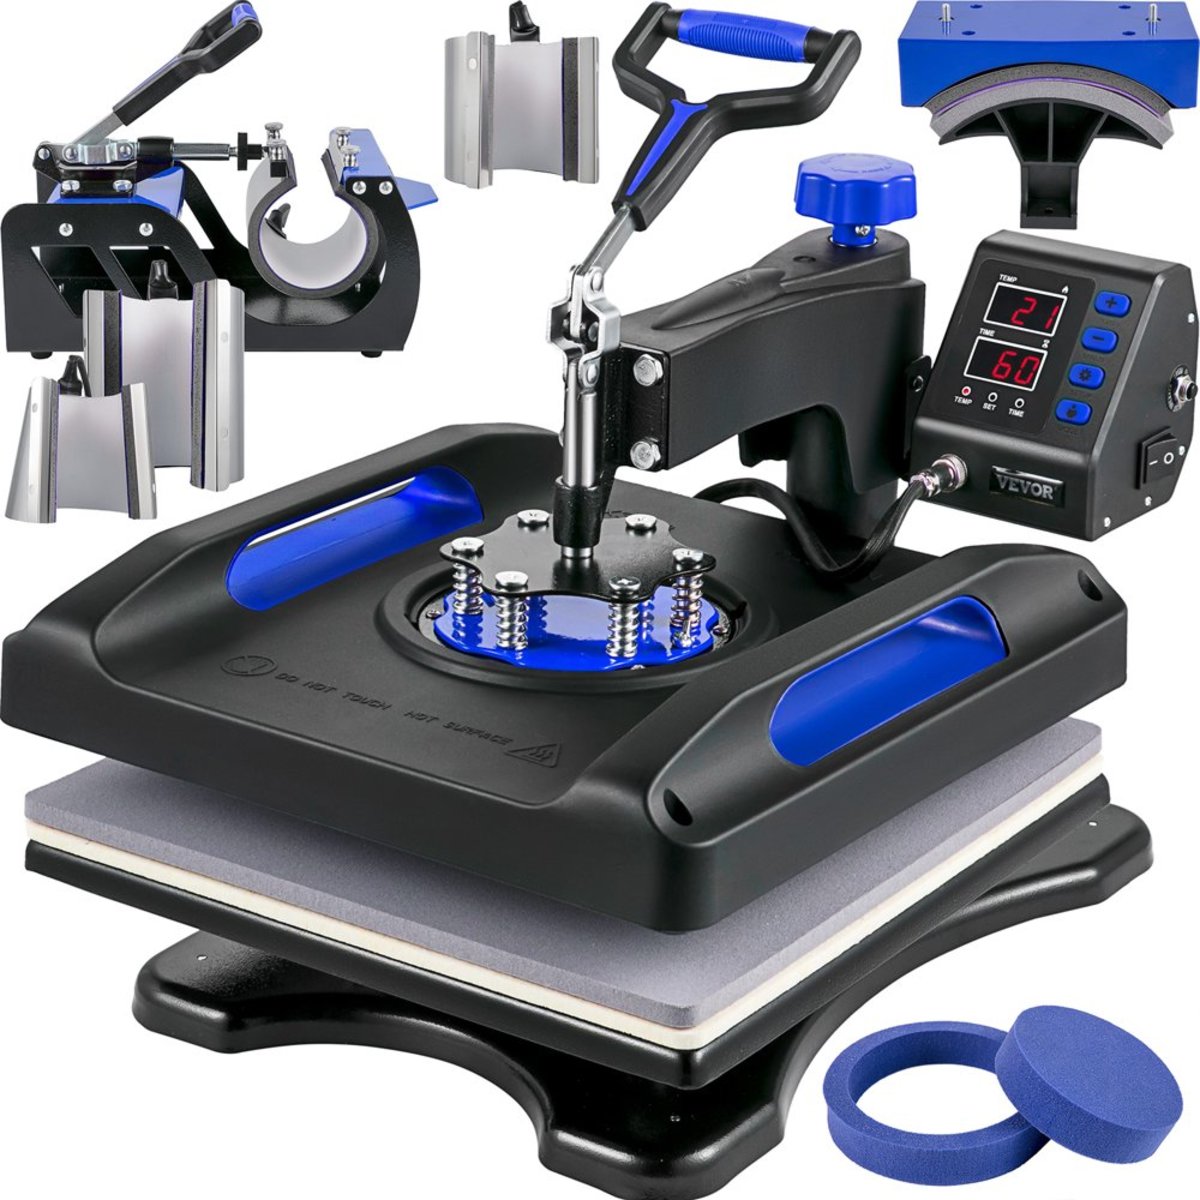 Many heat presses have accessories that help you do a multitude of projects